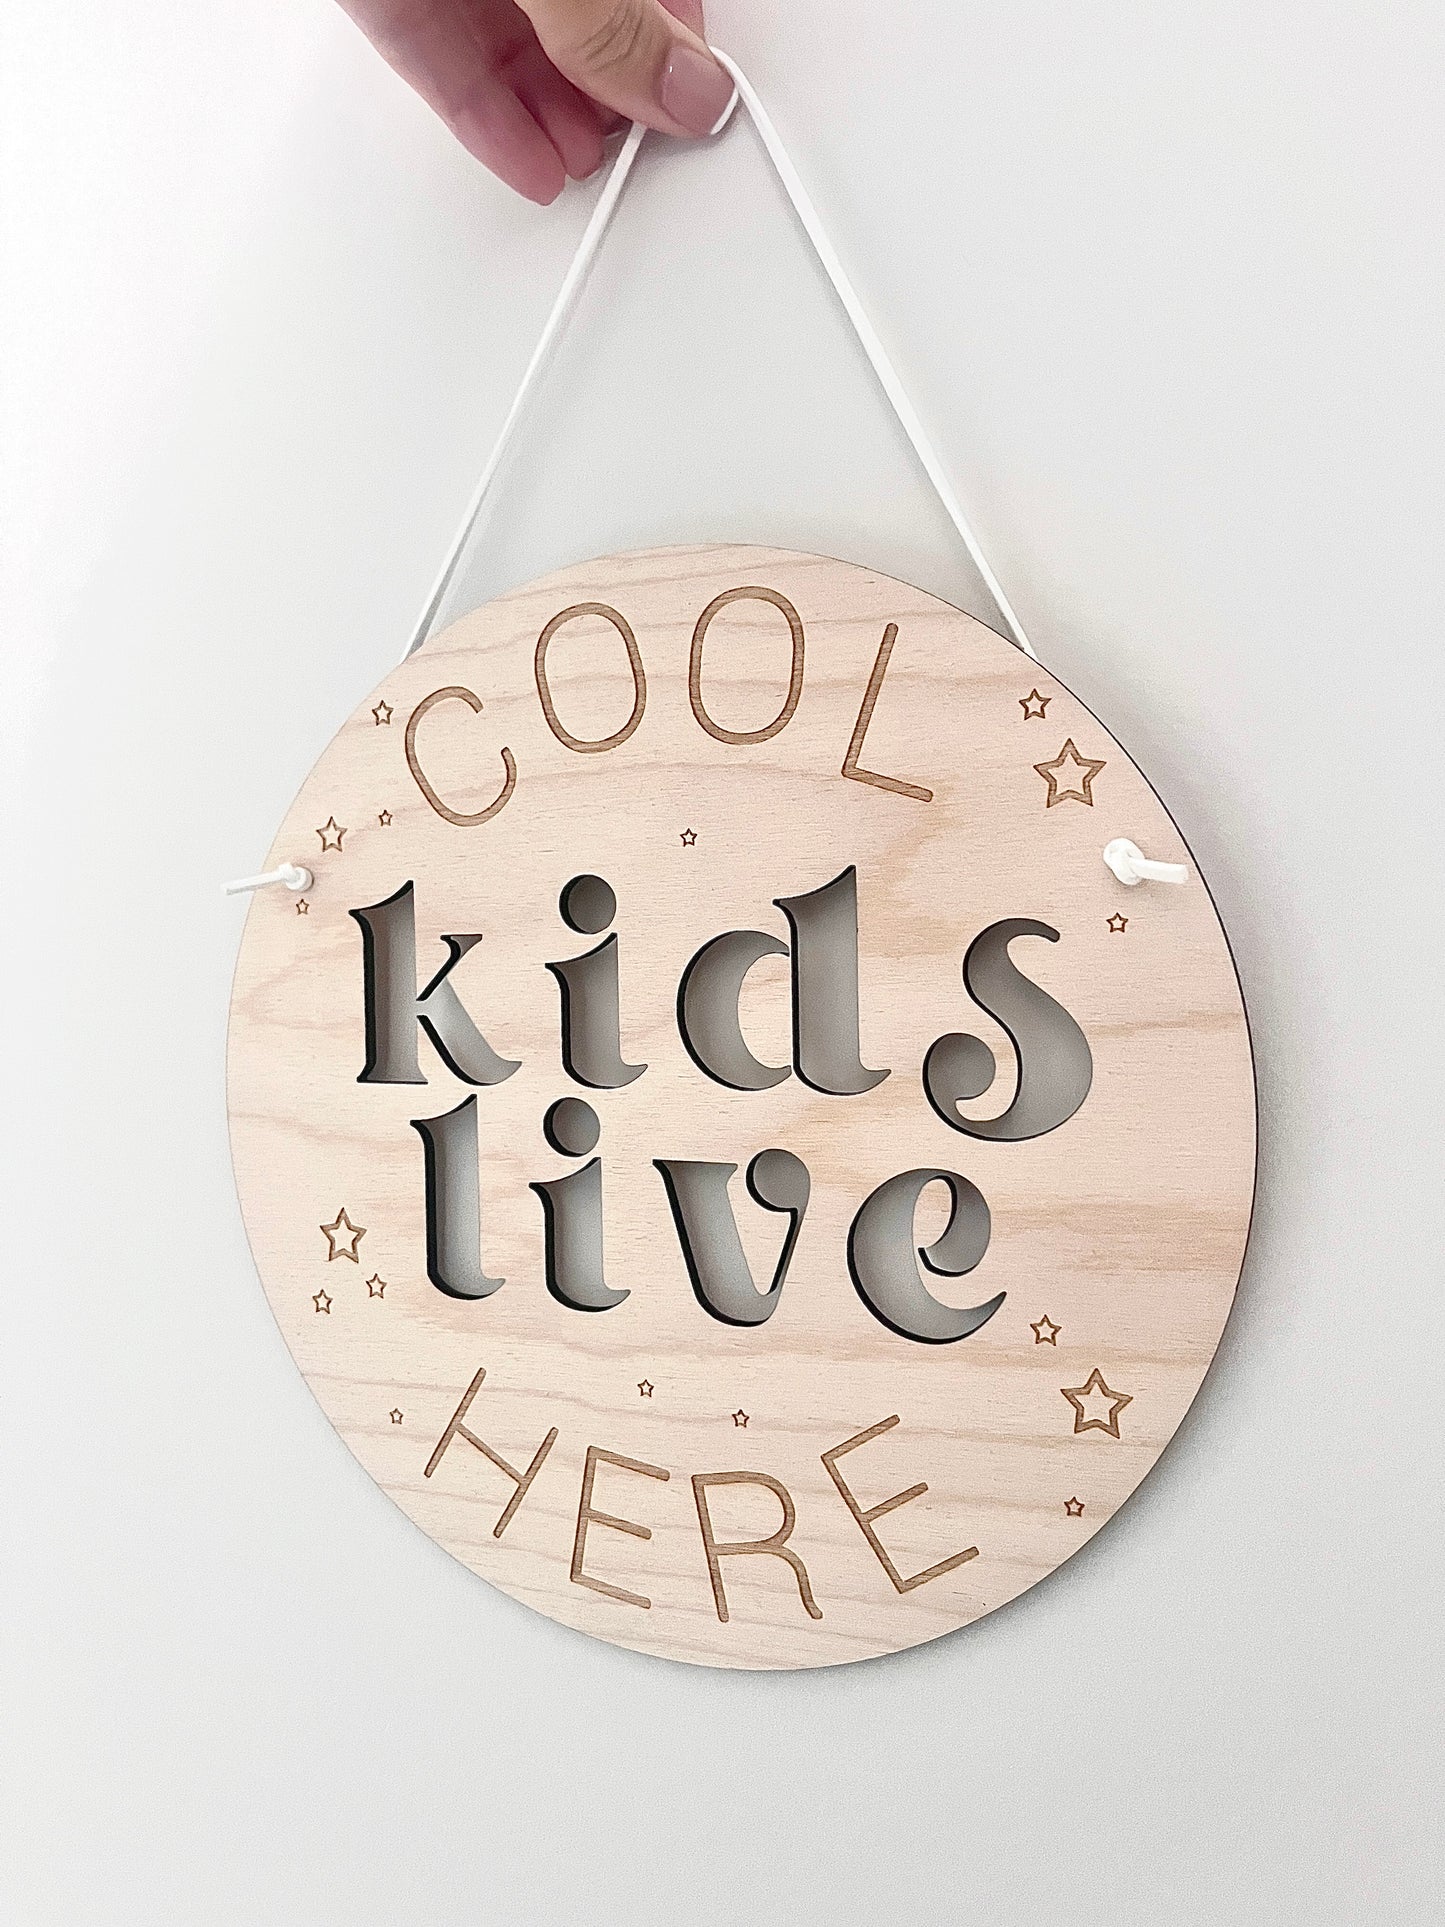 Cool kids live here sign